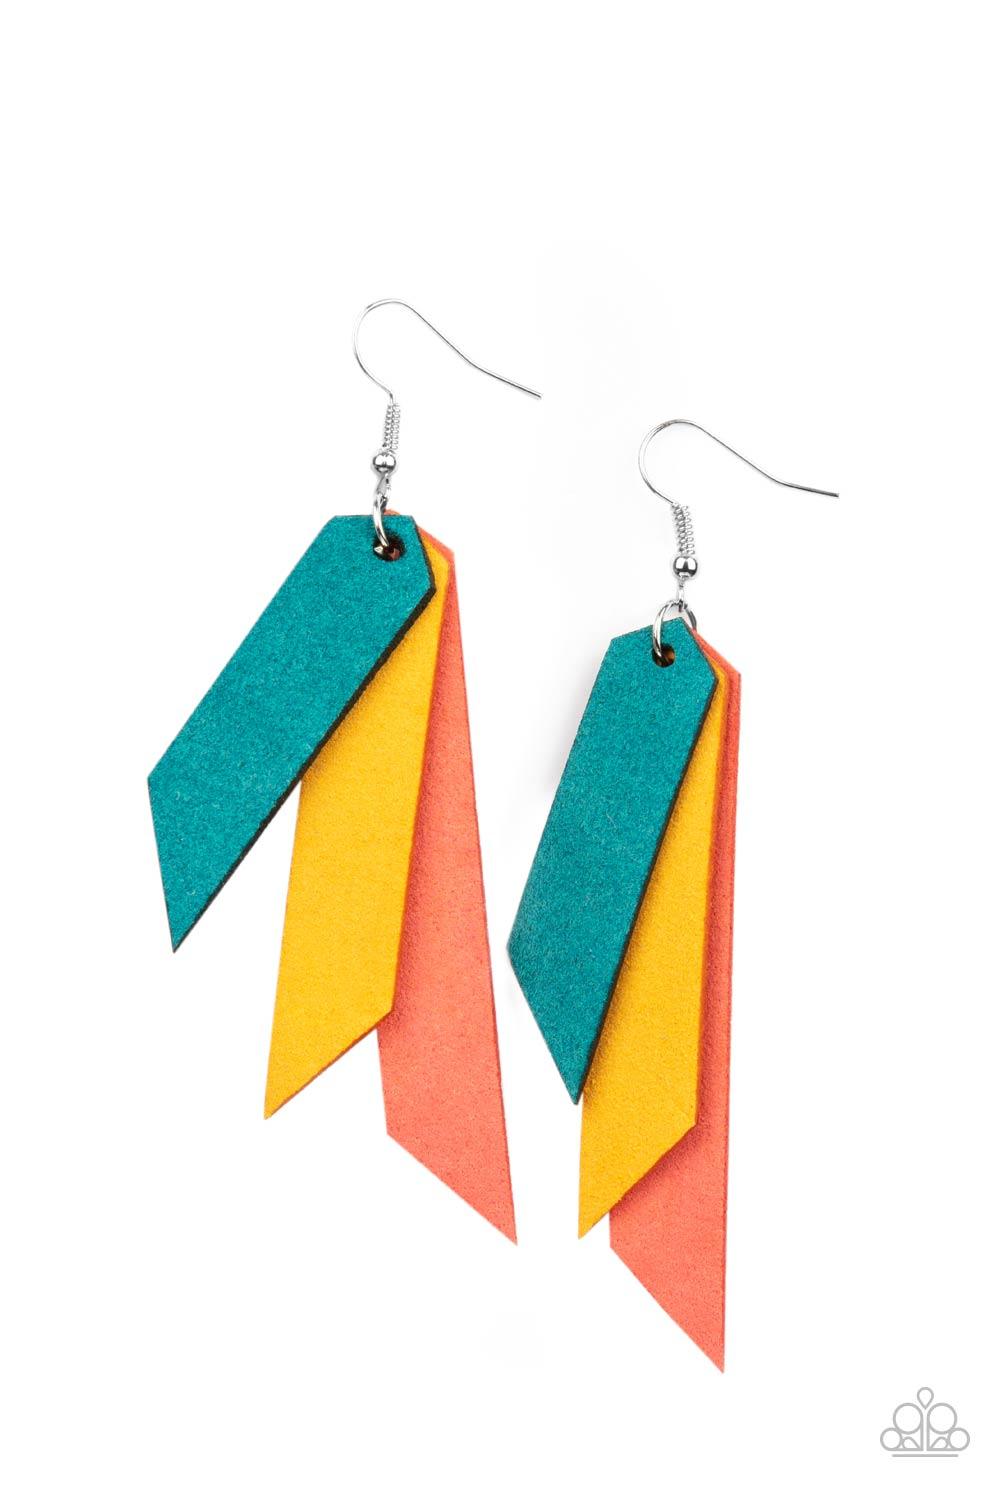 Paparazzi Accessories Suede Shade - Multi Featuring angled edges, a colorful collection of blue, coral, and yellow suede leather frames layer into a tapered tassel for a seasonal effect. Earring attaches to a standard fishhook fitting. Sold as one pair of